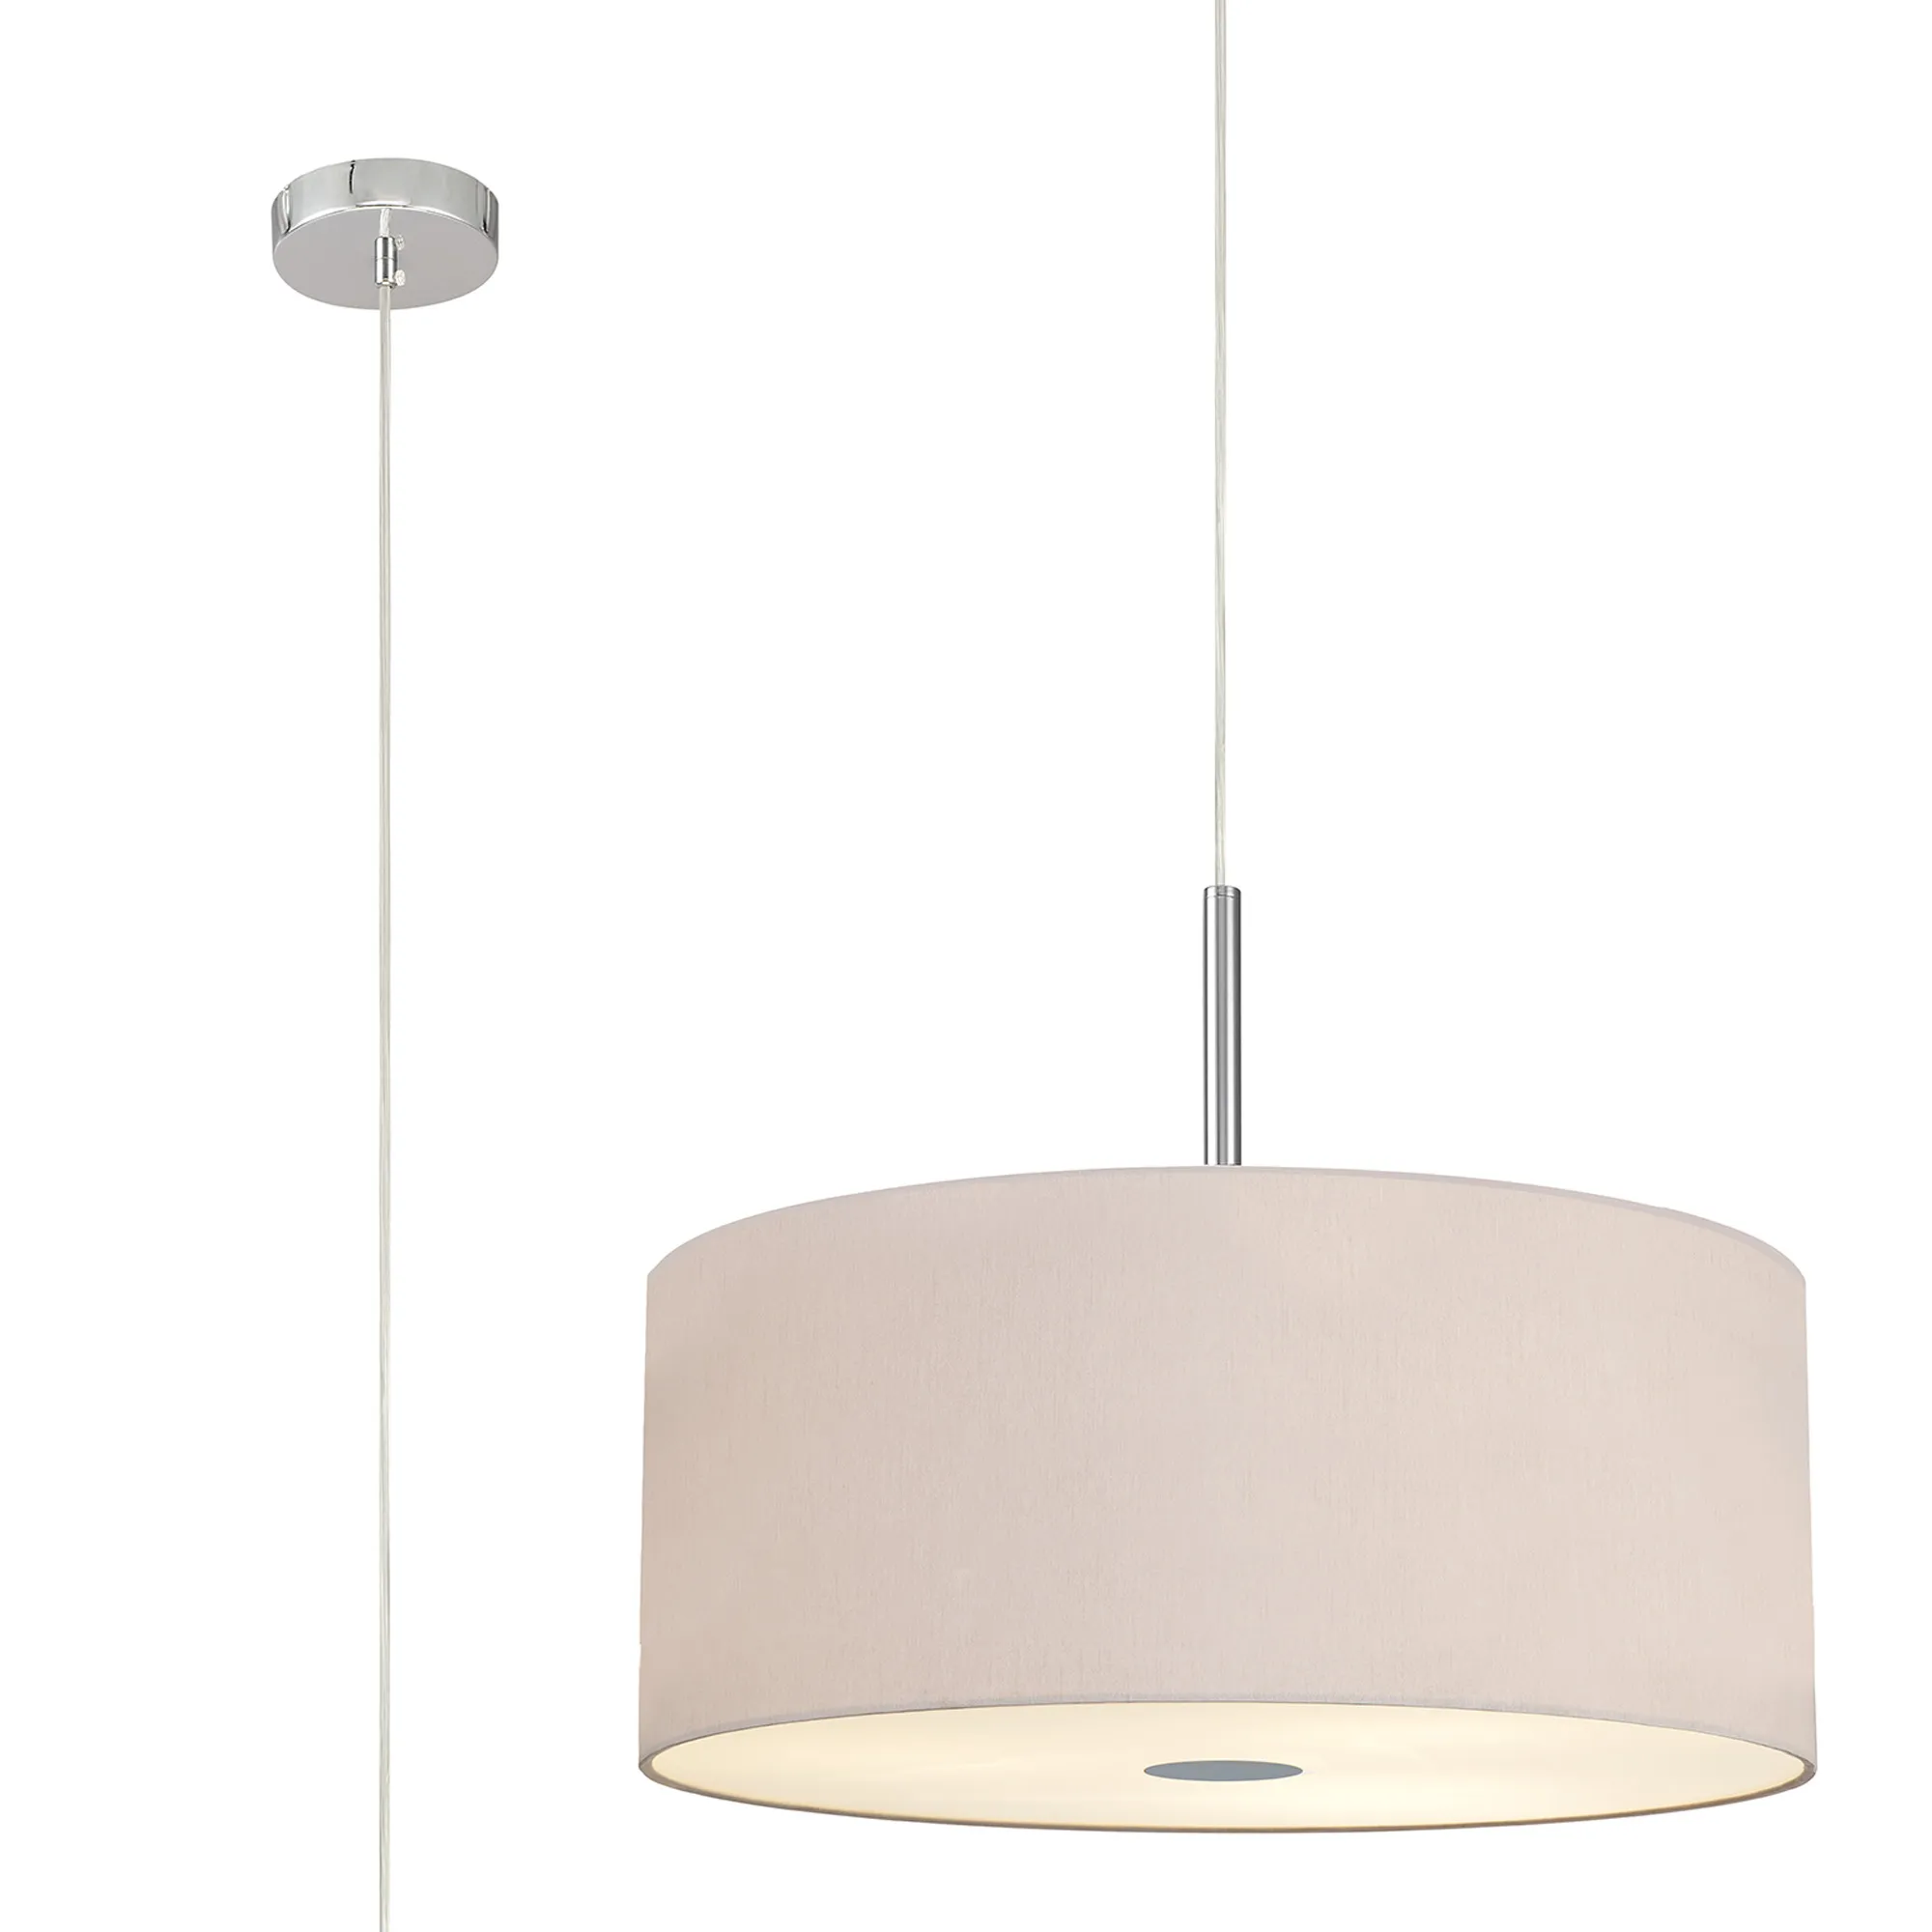 Baymont 60cm 5 Light Pendant Polished Chrome; Nude Beige/Moonlight; Frosted Diffuser